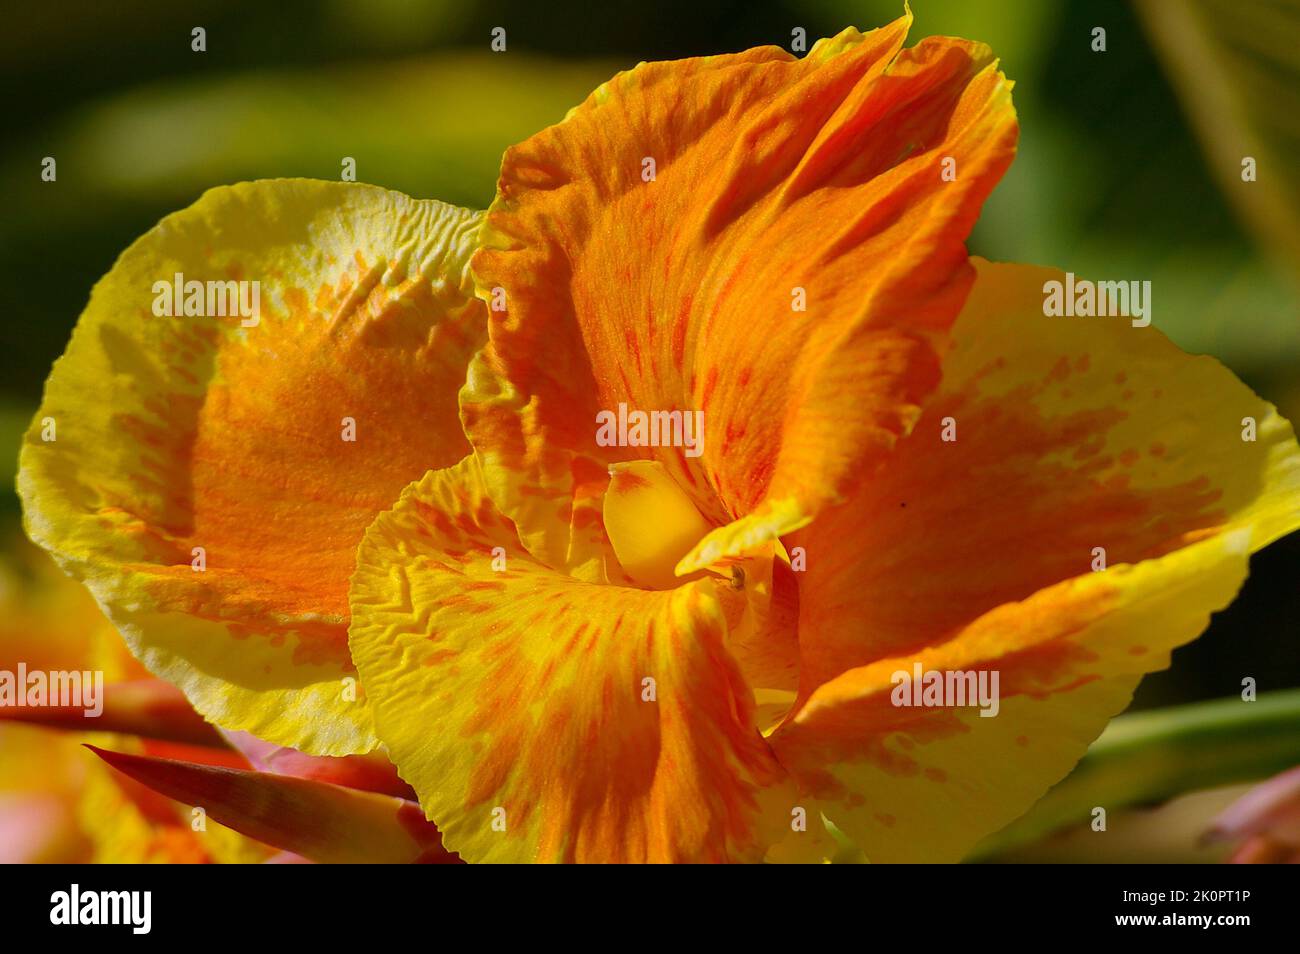 Close-up of bright yellow and orange flower of a Canna lily cultivar in summer sunshine. Private garden in Queensland, Australia. Stock Photo